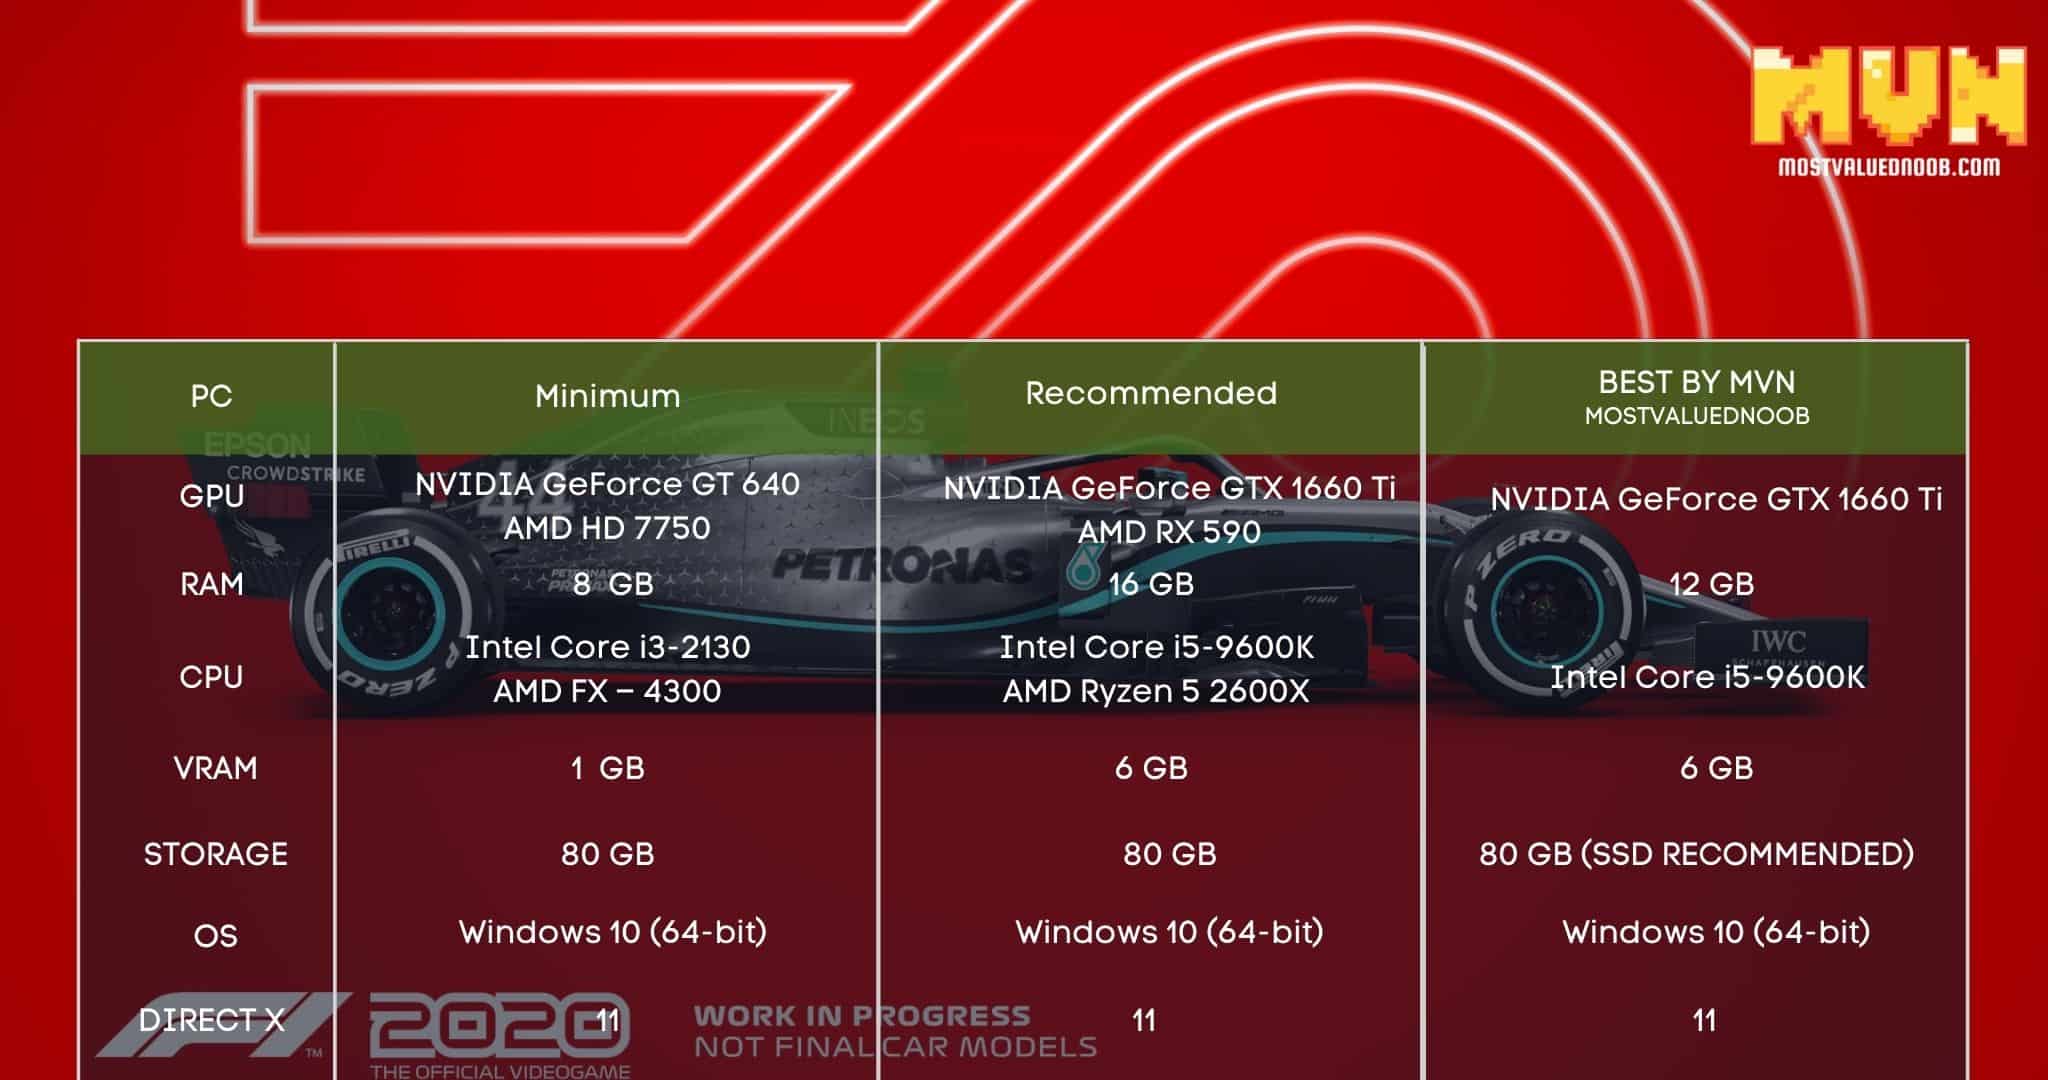 F1 2020 System Requirements Can O Run it on My PC?